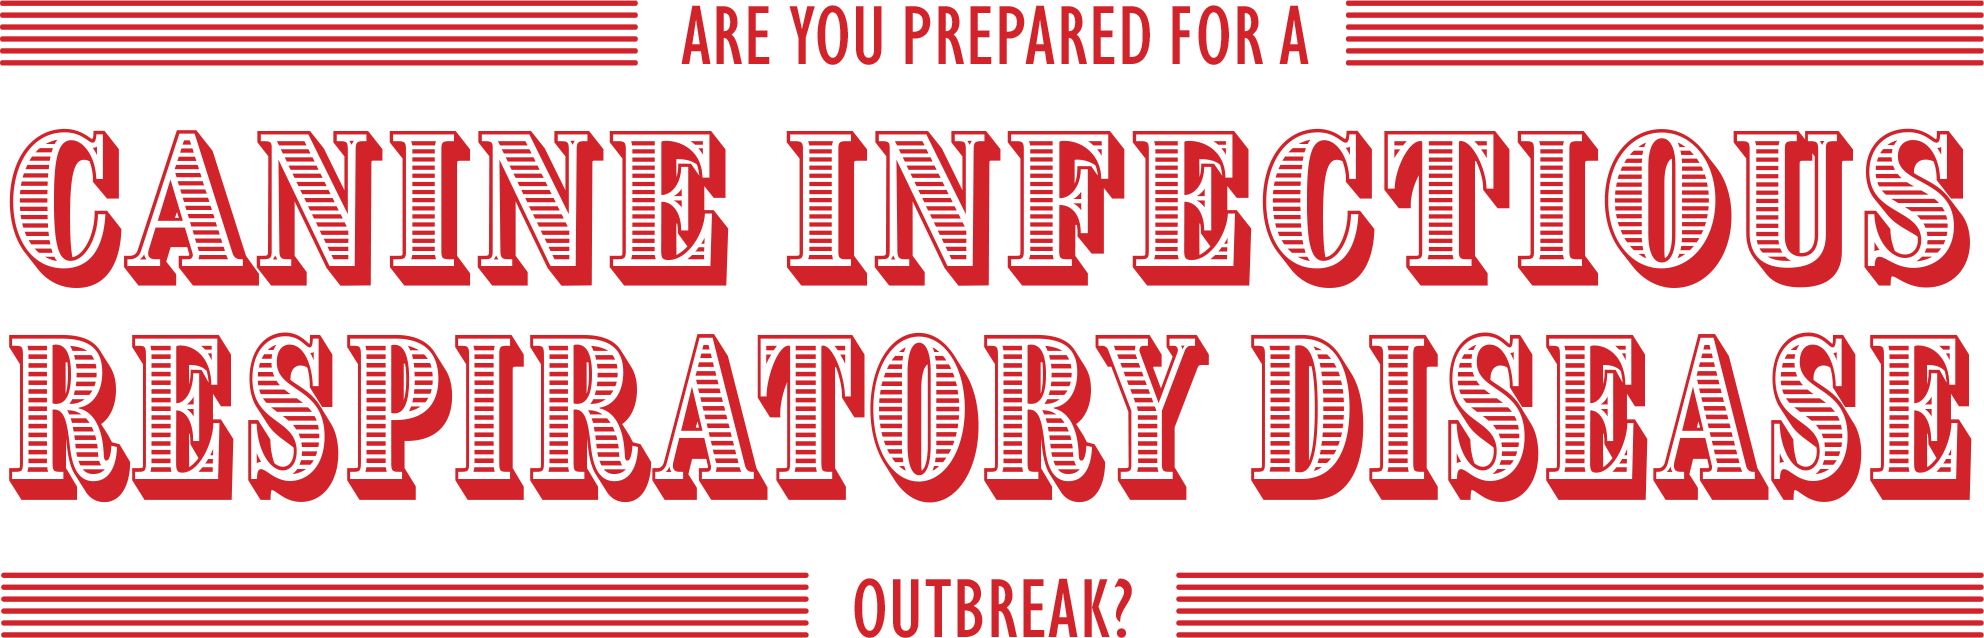 Are you prepared for a canine infectious respiratory disease outbreak?